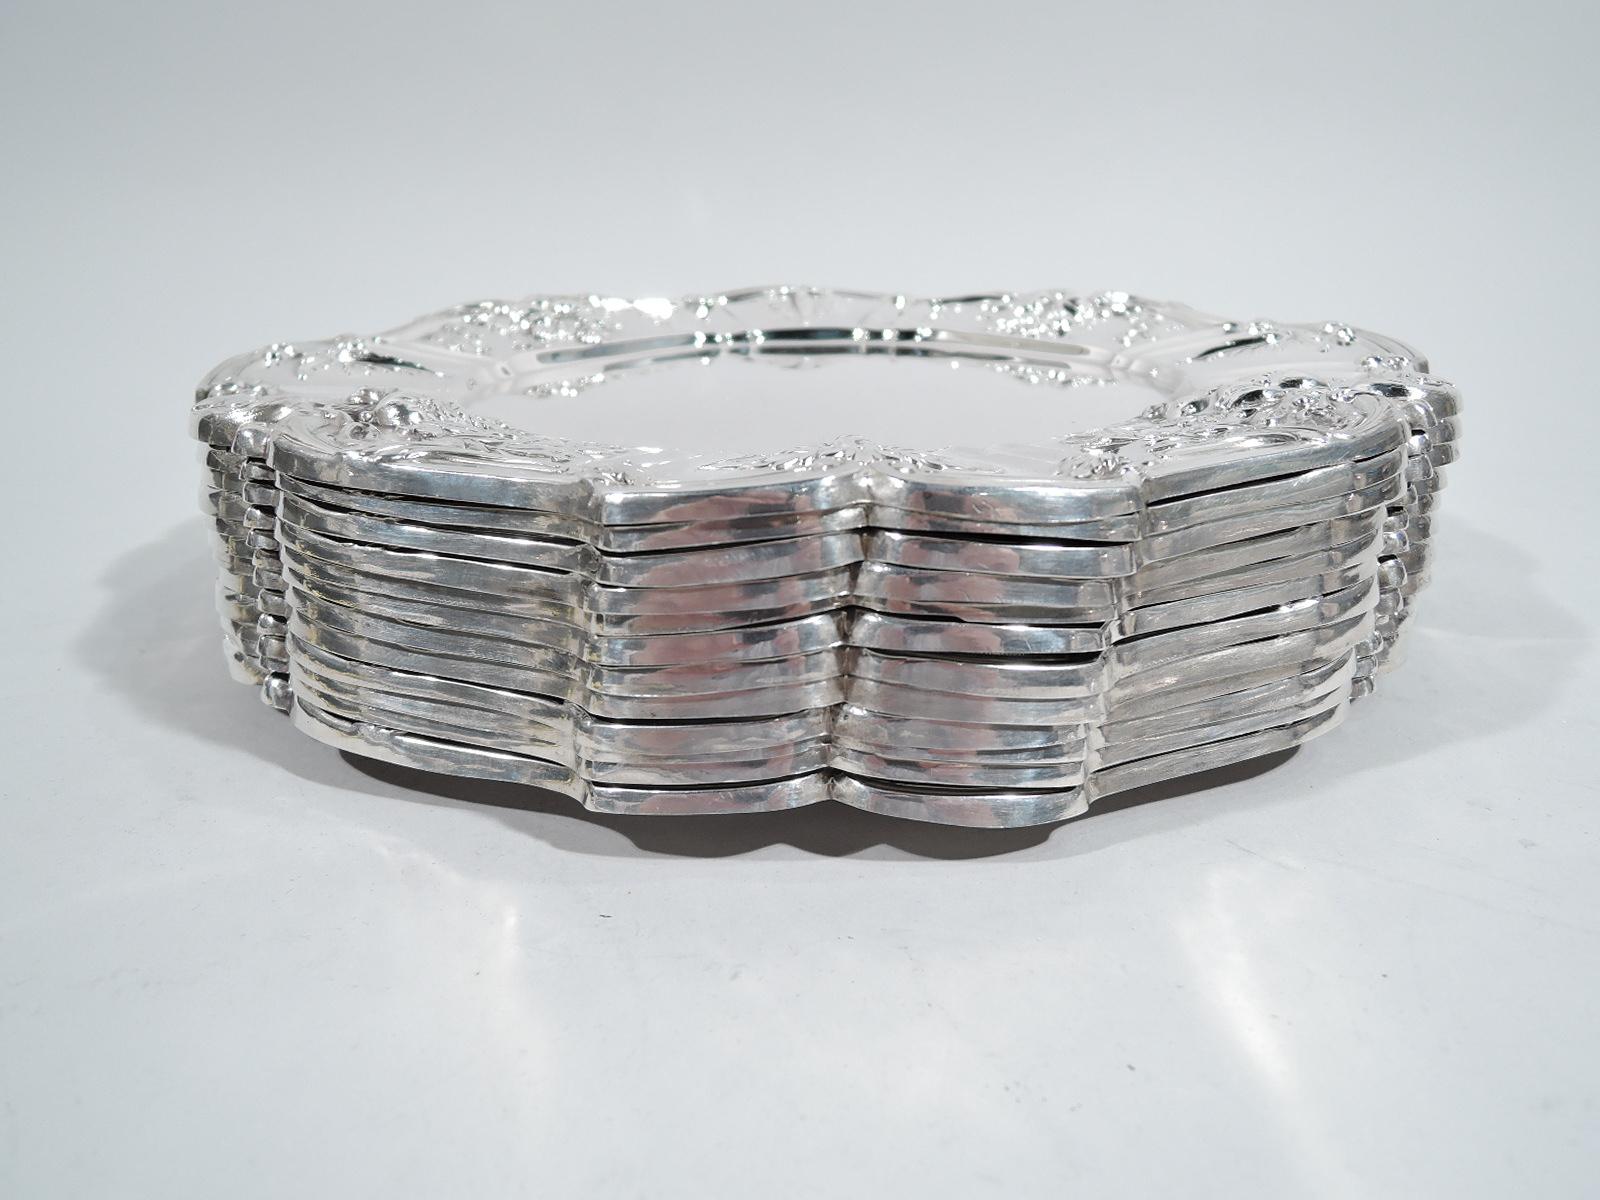 Twelve Francis I sterling silver dinner plates. Made by Reed & Barton in Taunton, Mass. Plain well and wide shoulder with chased vegetation and plants in alternating wide and narrow frames. Rim scrolled. A beautiful midcentury era set in the